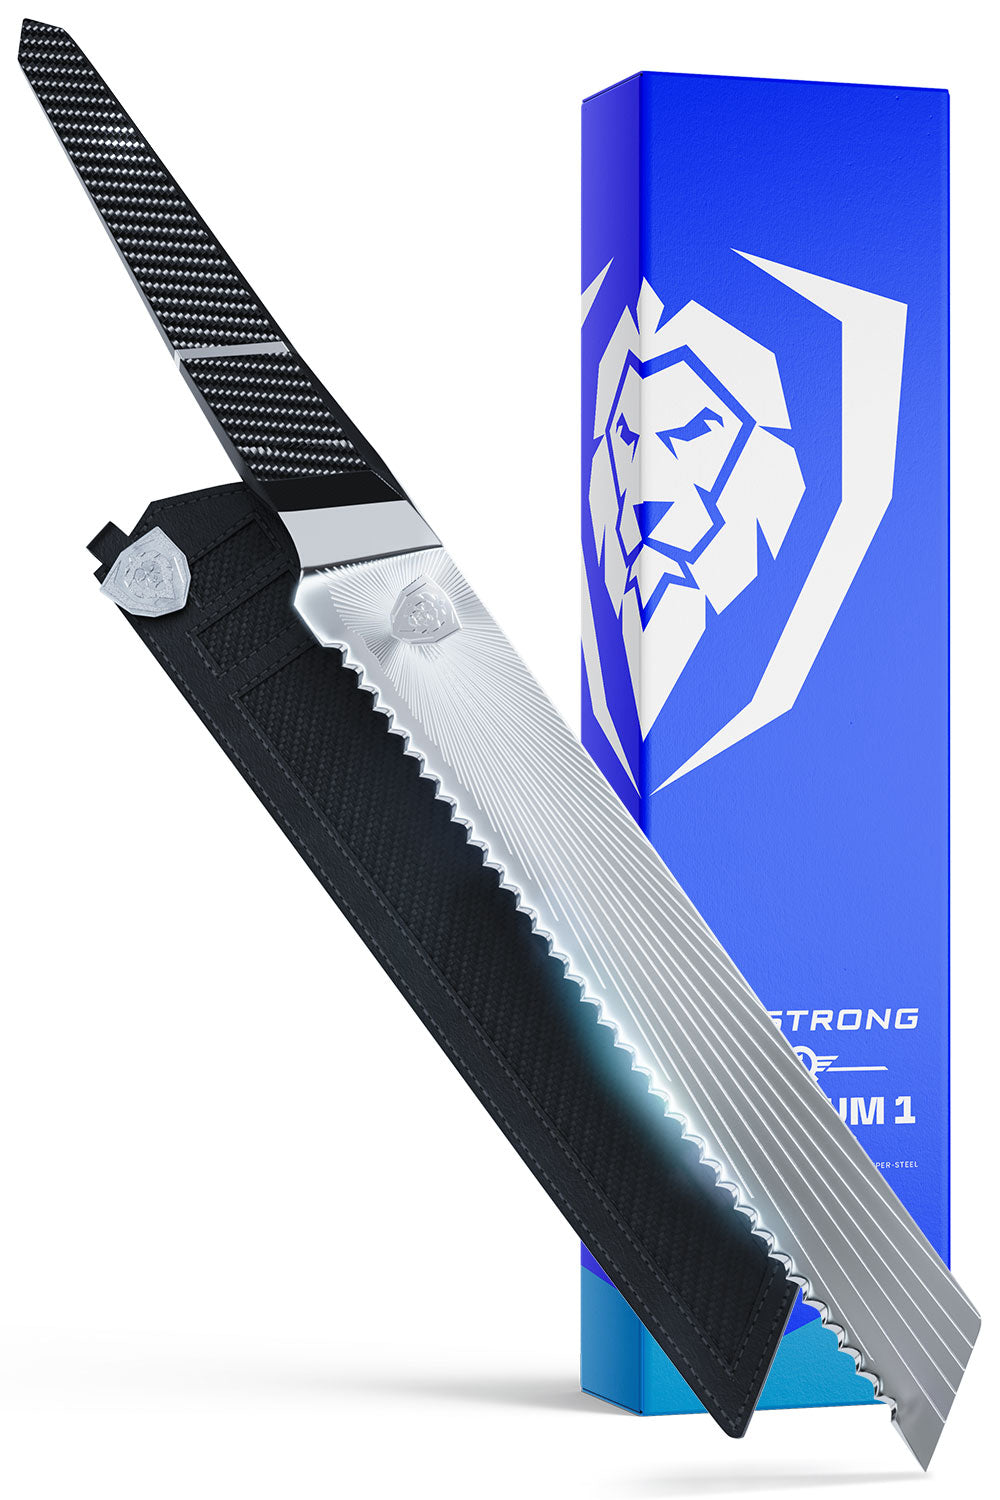 Dalstrong quantum 1 series 9 inch bread knife with dragon skin handle in front of it's premium packaging.